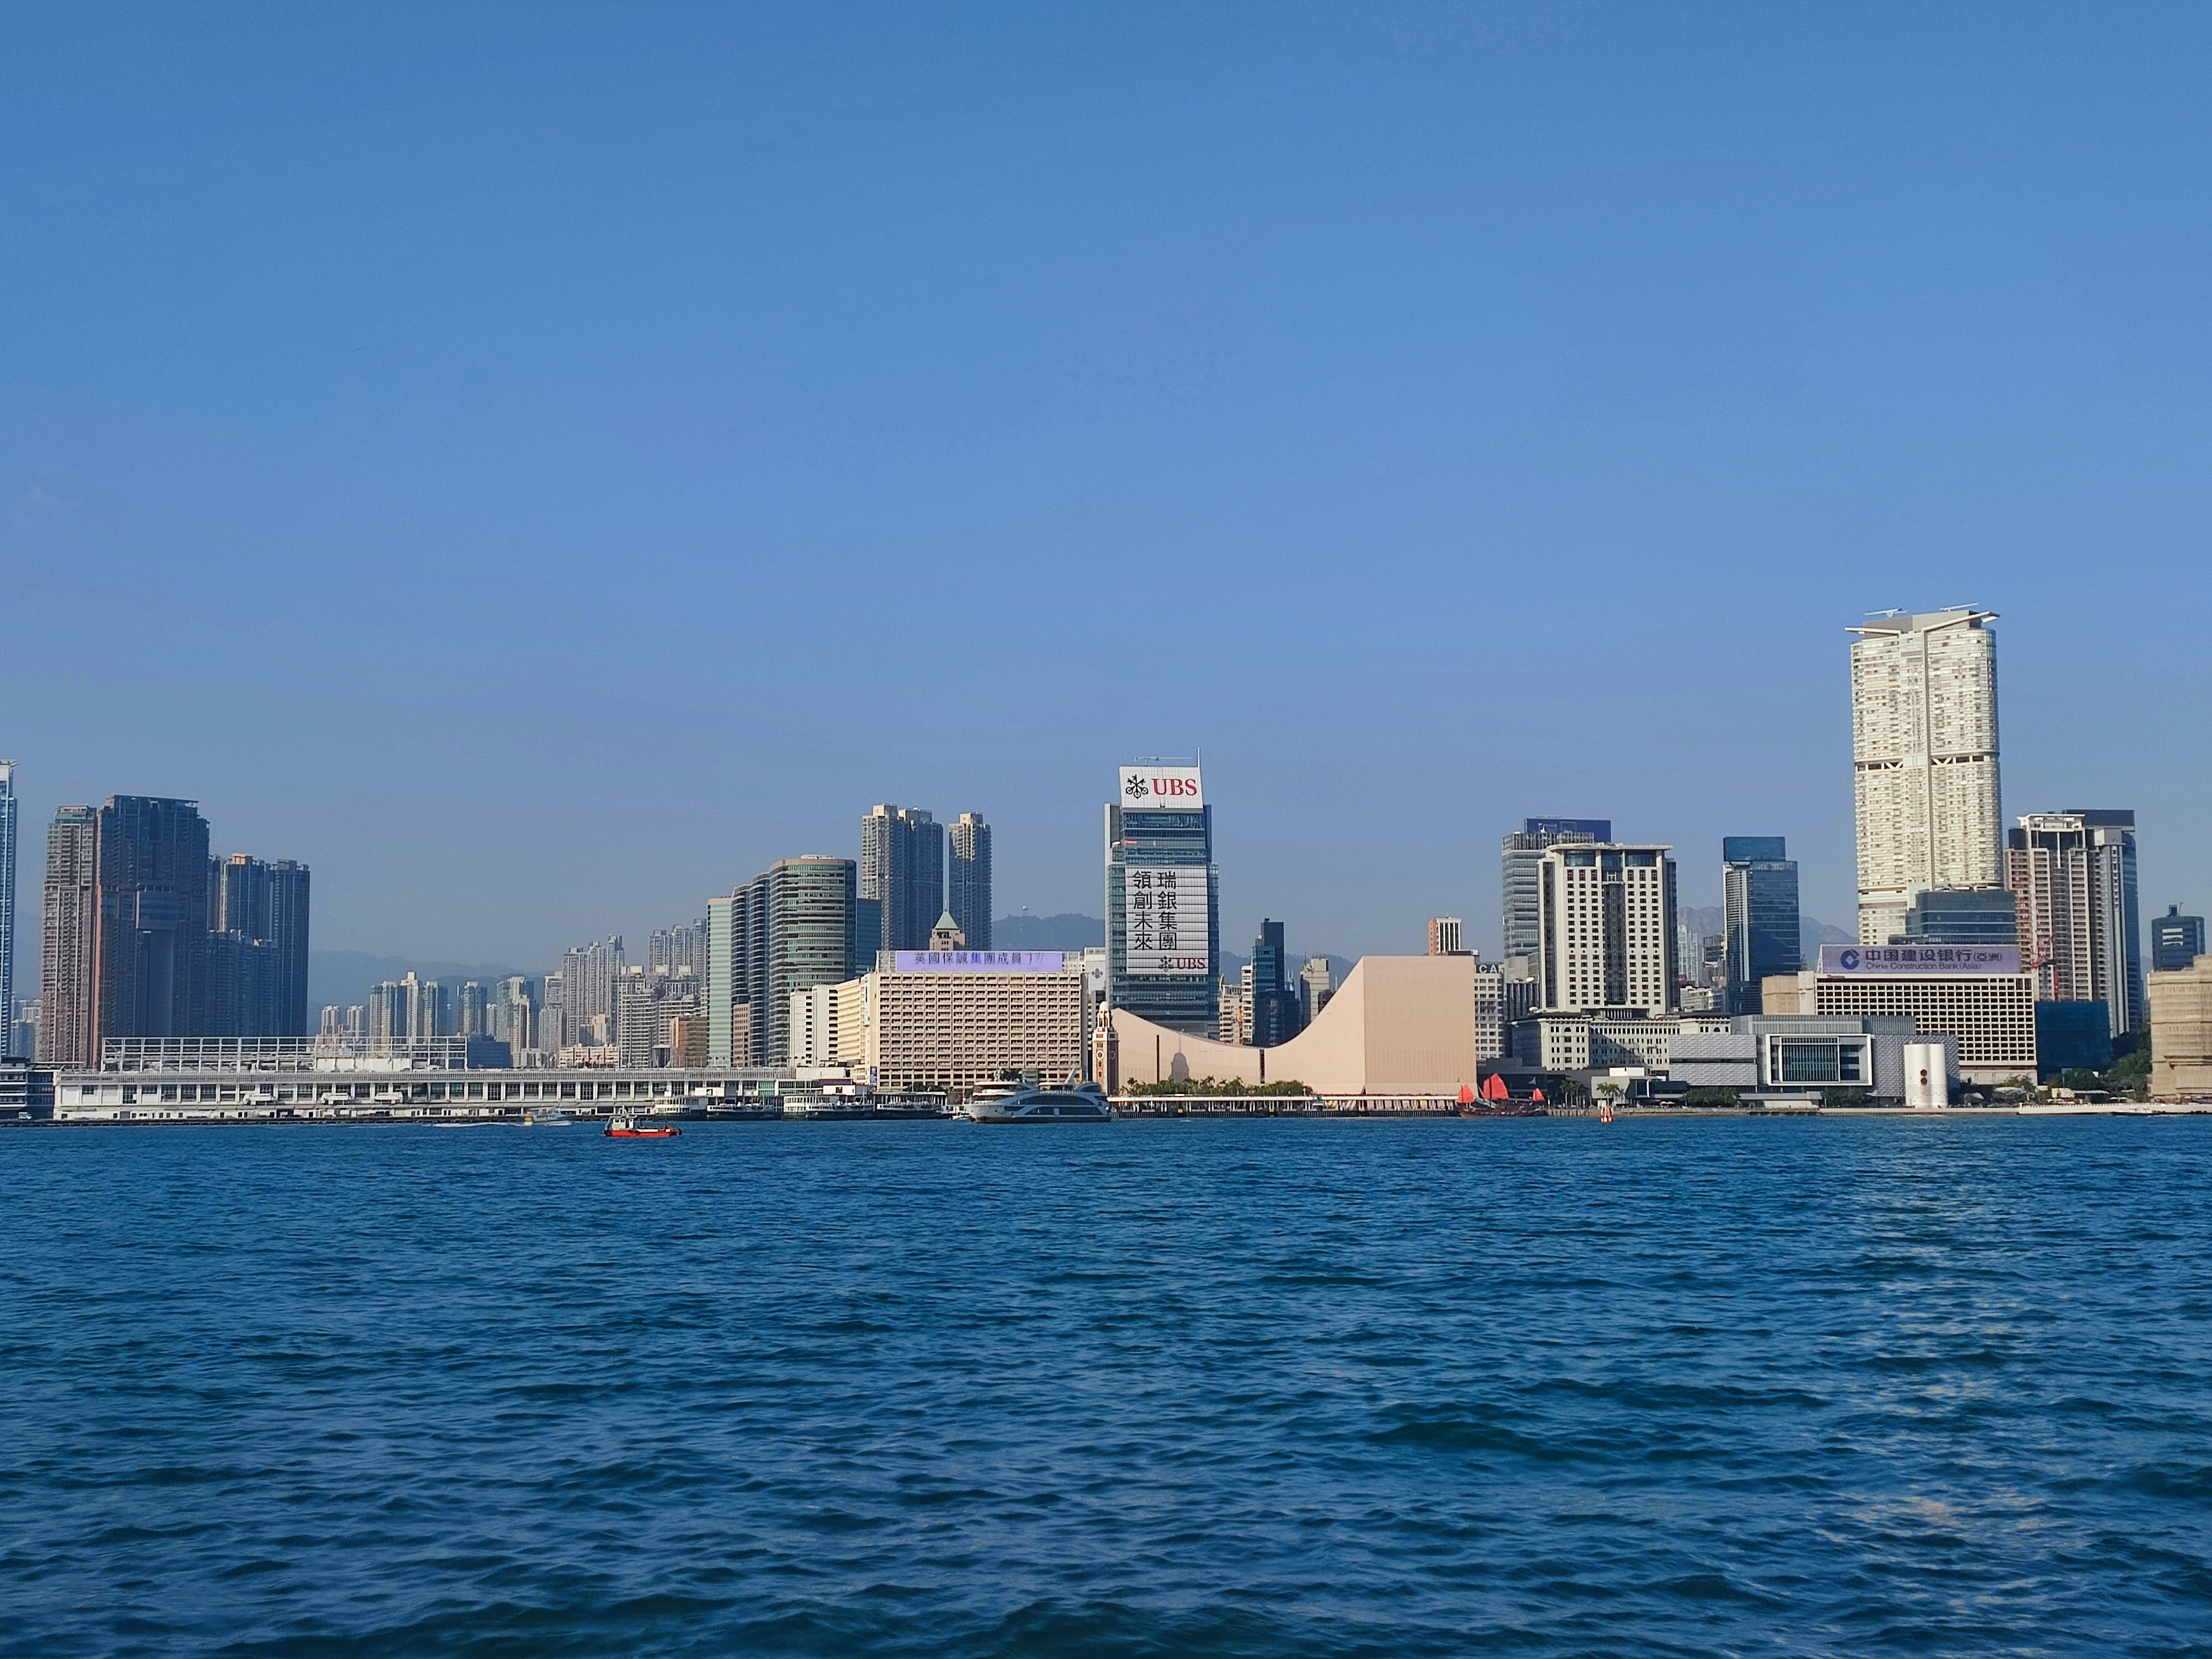 From left to right: Star Ferry Pier, Star House, Hong Kong Cultural Centre, Hong Kong Museum of Art. This is the tip of Kowloon Peninsula and coastline of the area called Tsim Sha Tsui. The skyscraper building on the right is a luxurious apartment building called The Masterpiece (Hong Kong).